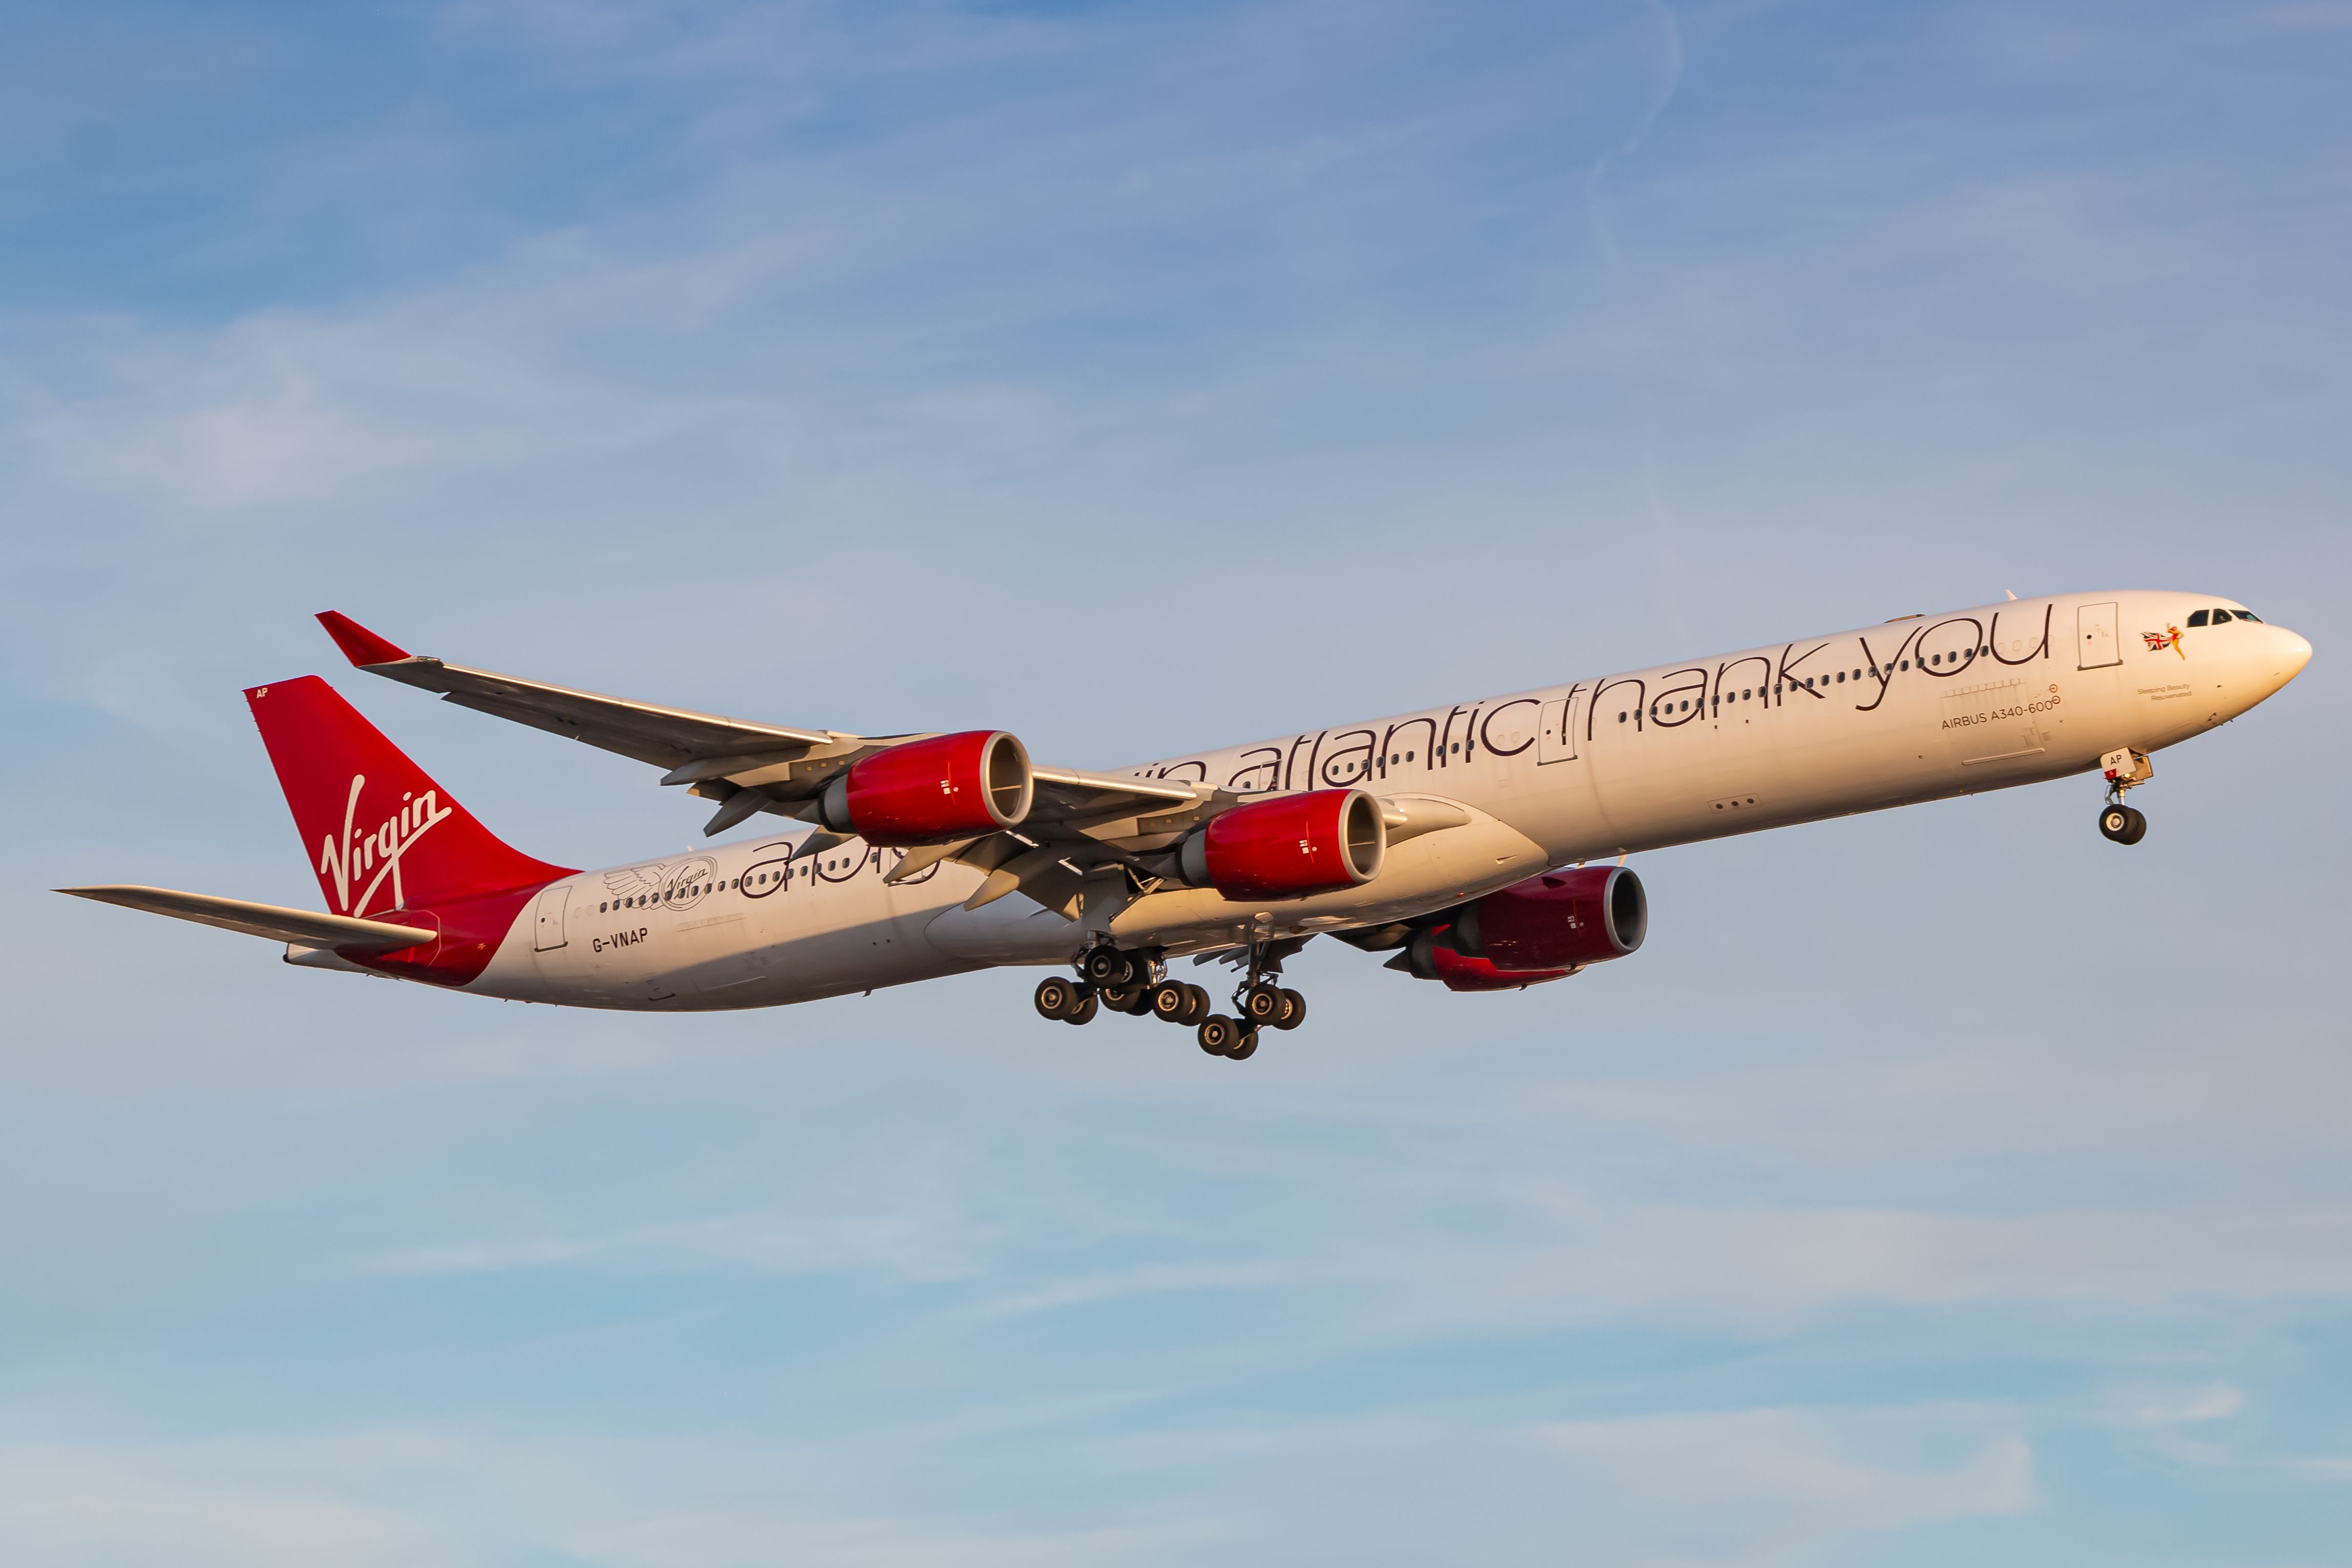 A Virgin Atlantic Airbus A340 flying in the sky.